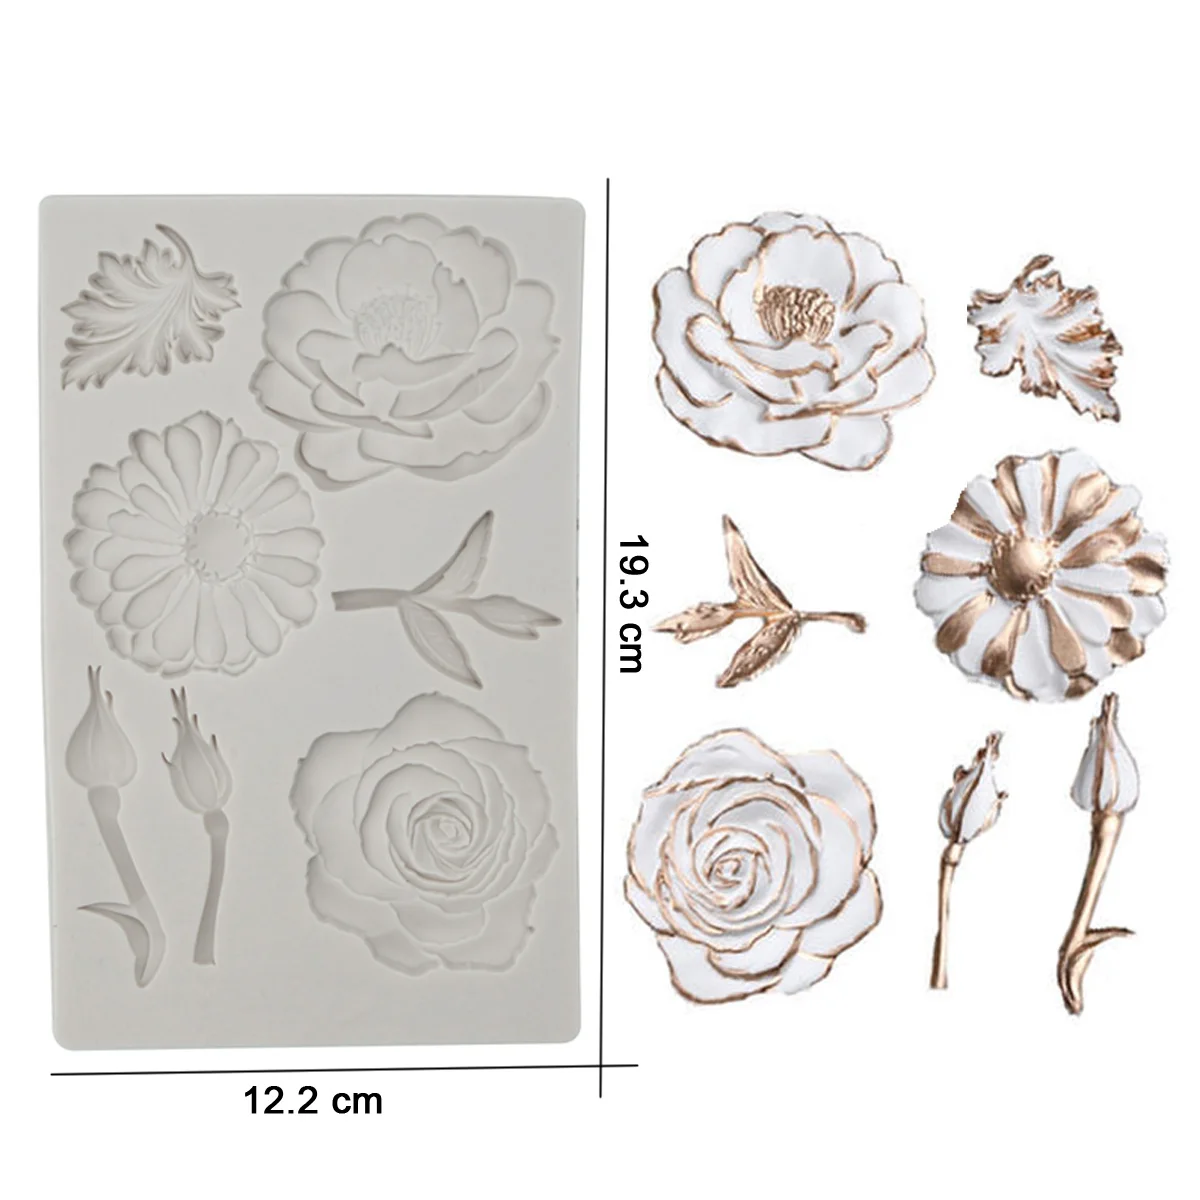 

Sugarcraft Fondant Silicone Mold Wedding Cake Decoration Rose Relief Chocolate Lily Of The Valley Flower Camellia Gumpaste Mould